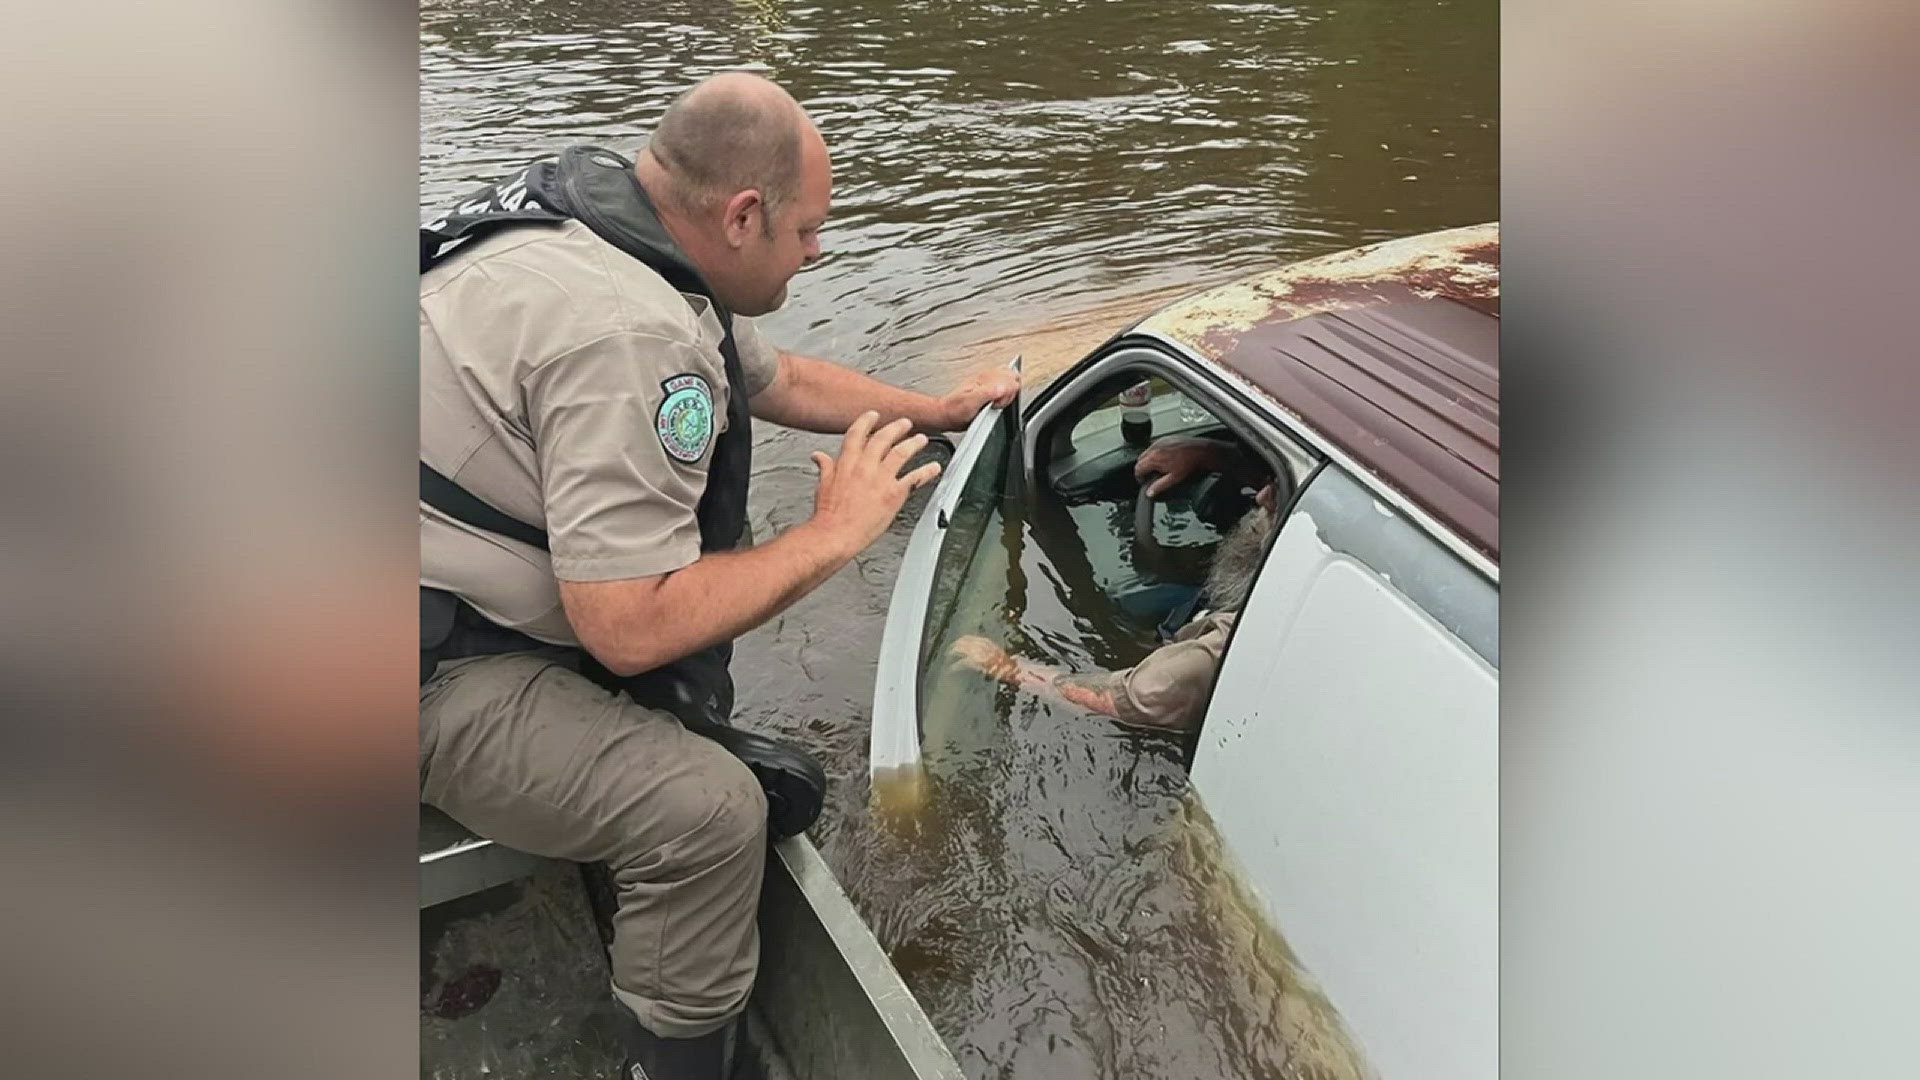 67-year-old veteran Floyd Burleson woke up to water rapidly rising on his property and he had to be rescued from inside his van.